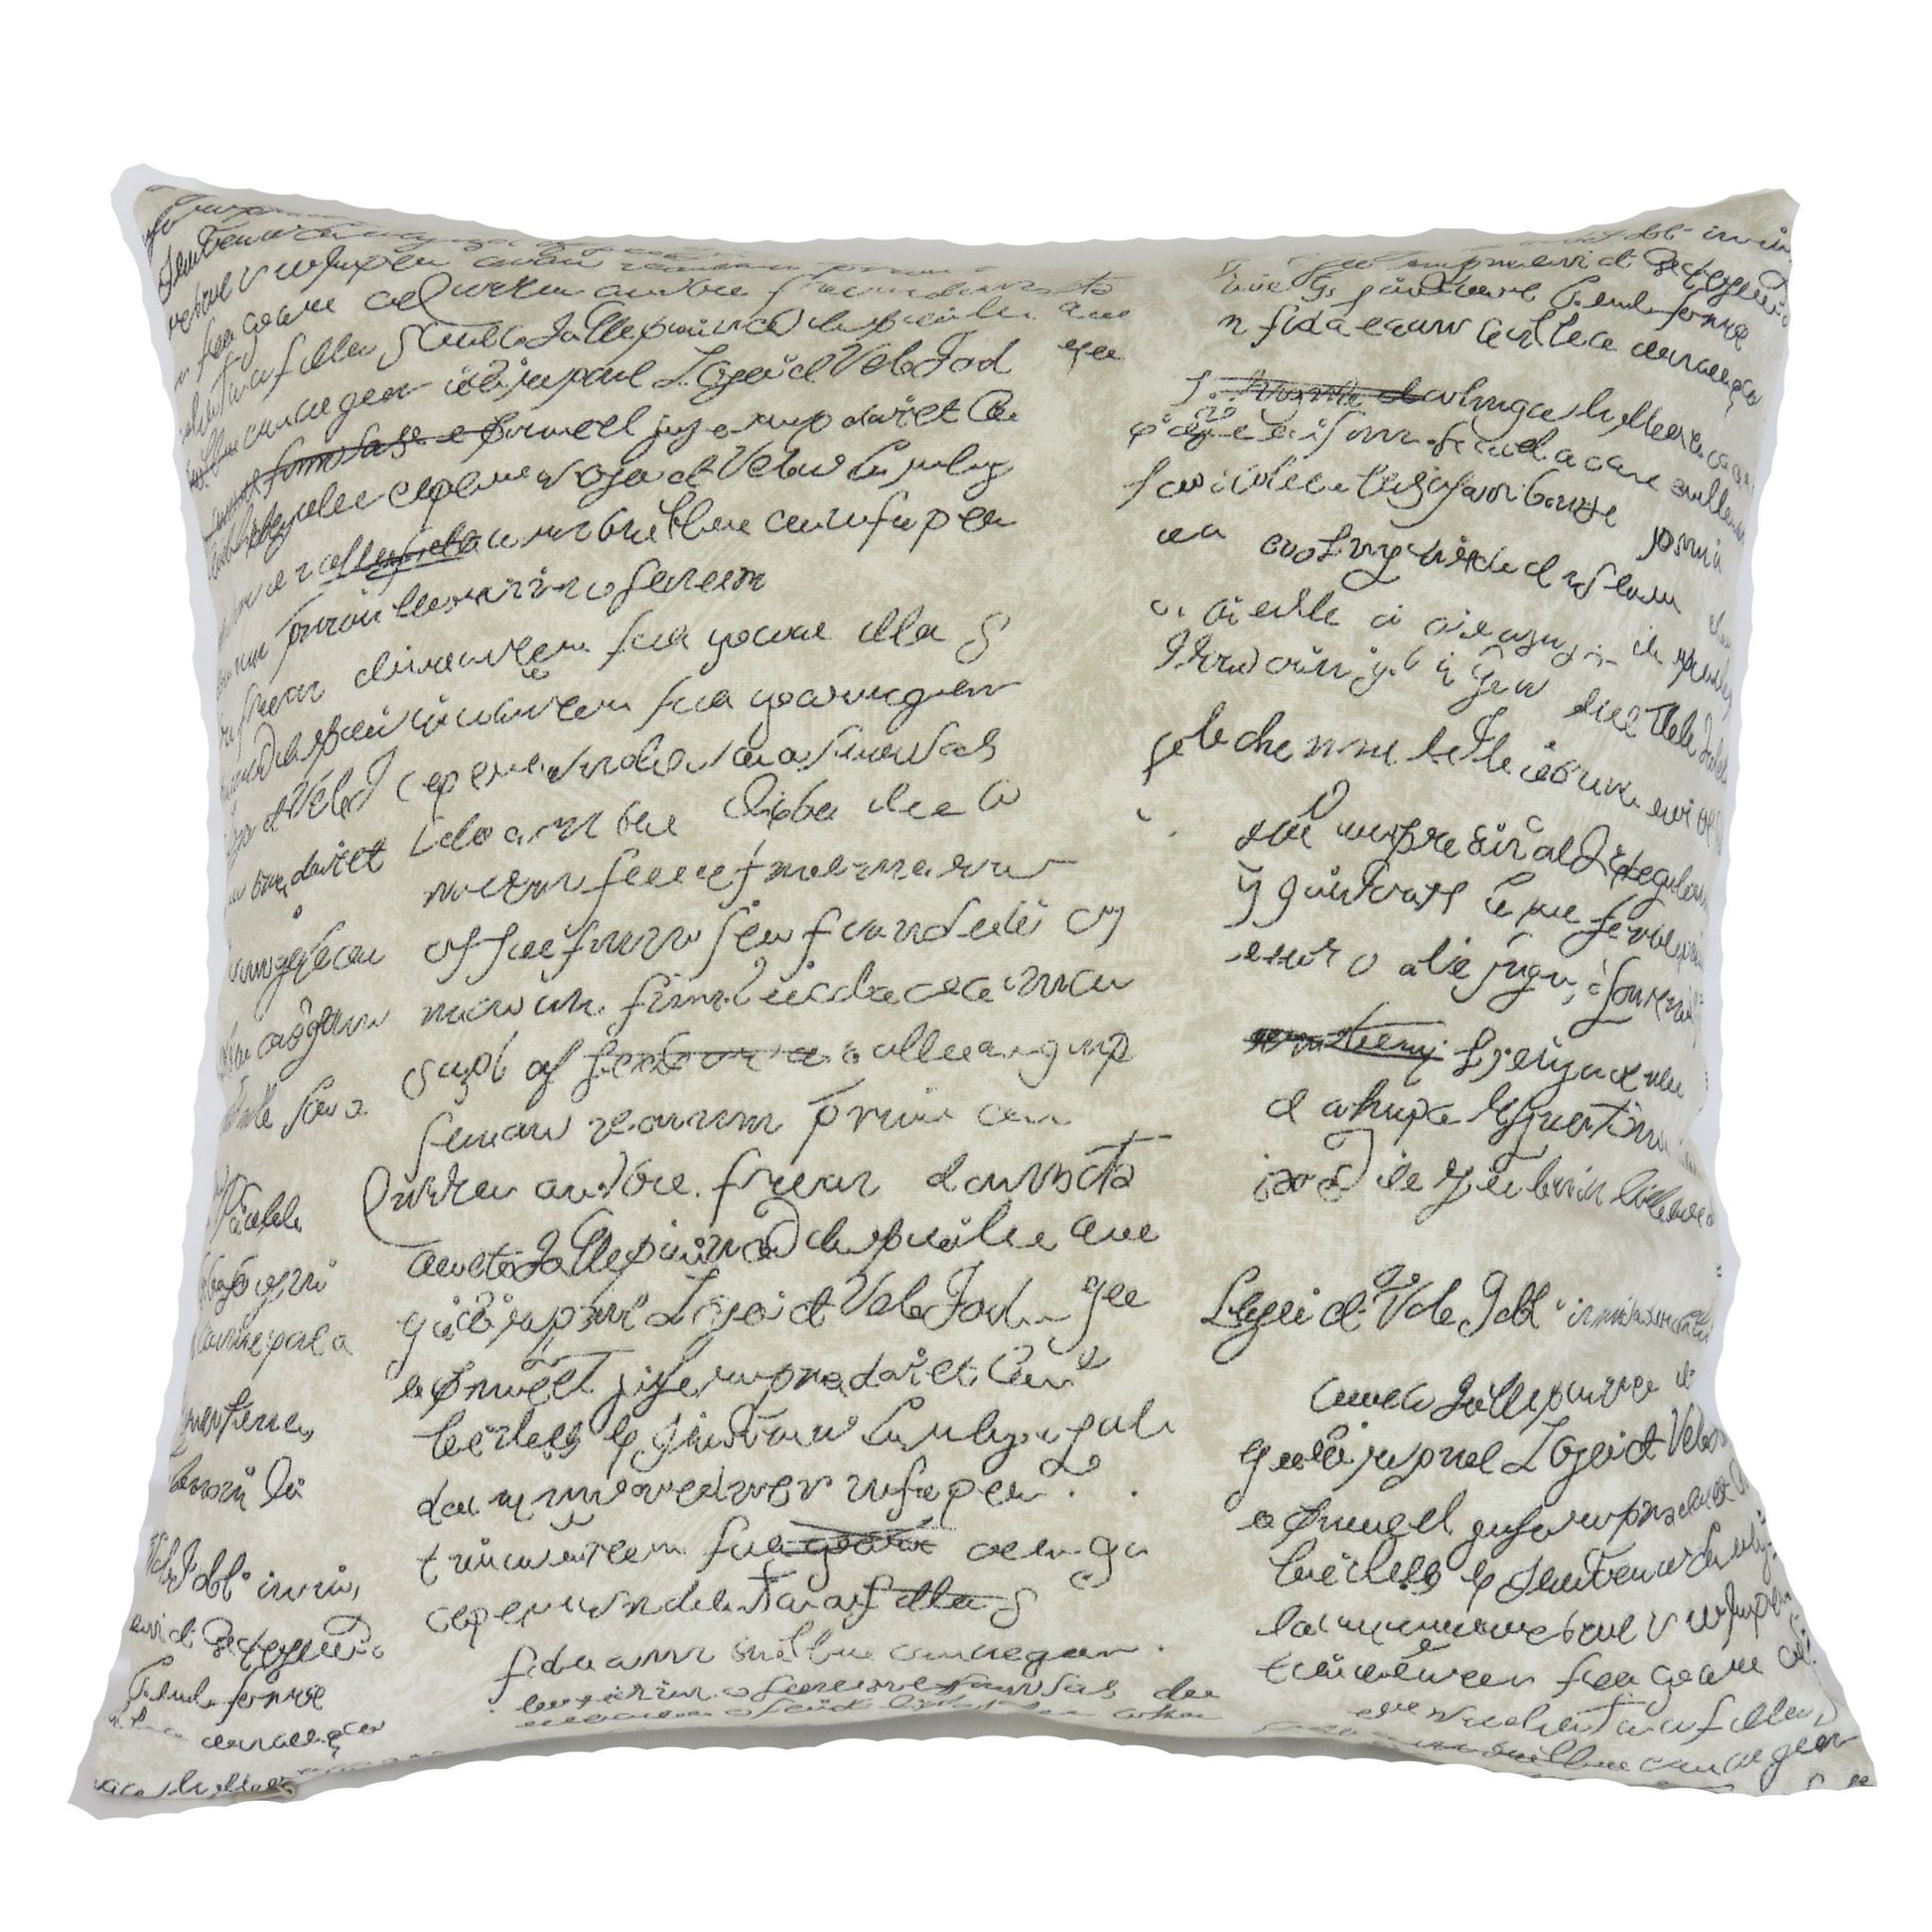 Waverly scripted putty print pillow cover